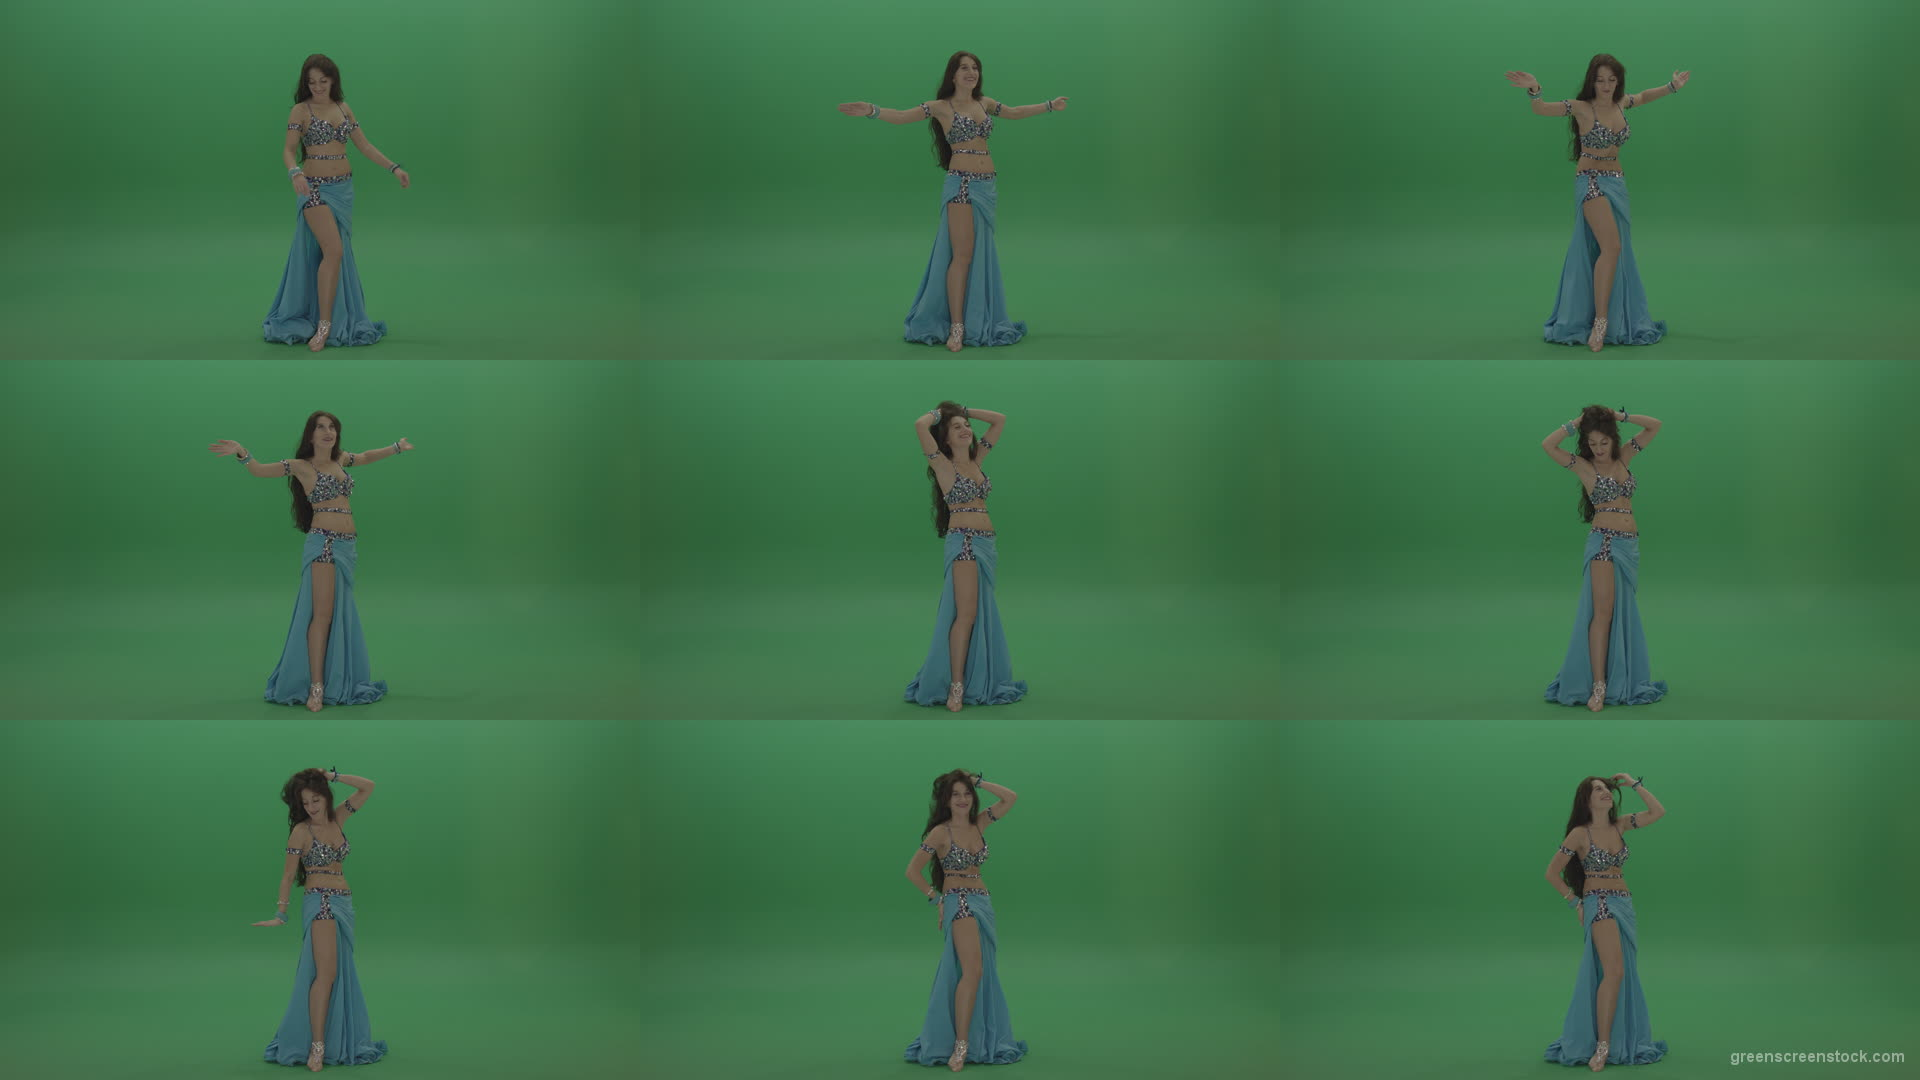 Awesome-belly-dancer-in-blue-wear-display-amazing-dance-moves-over-chromakey-background Green Screen Stock